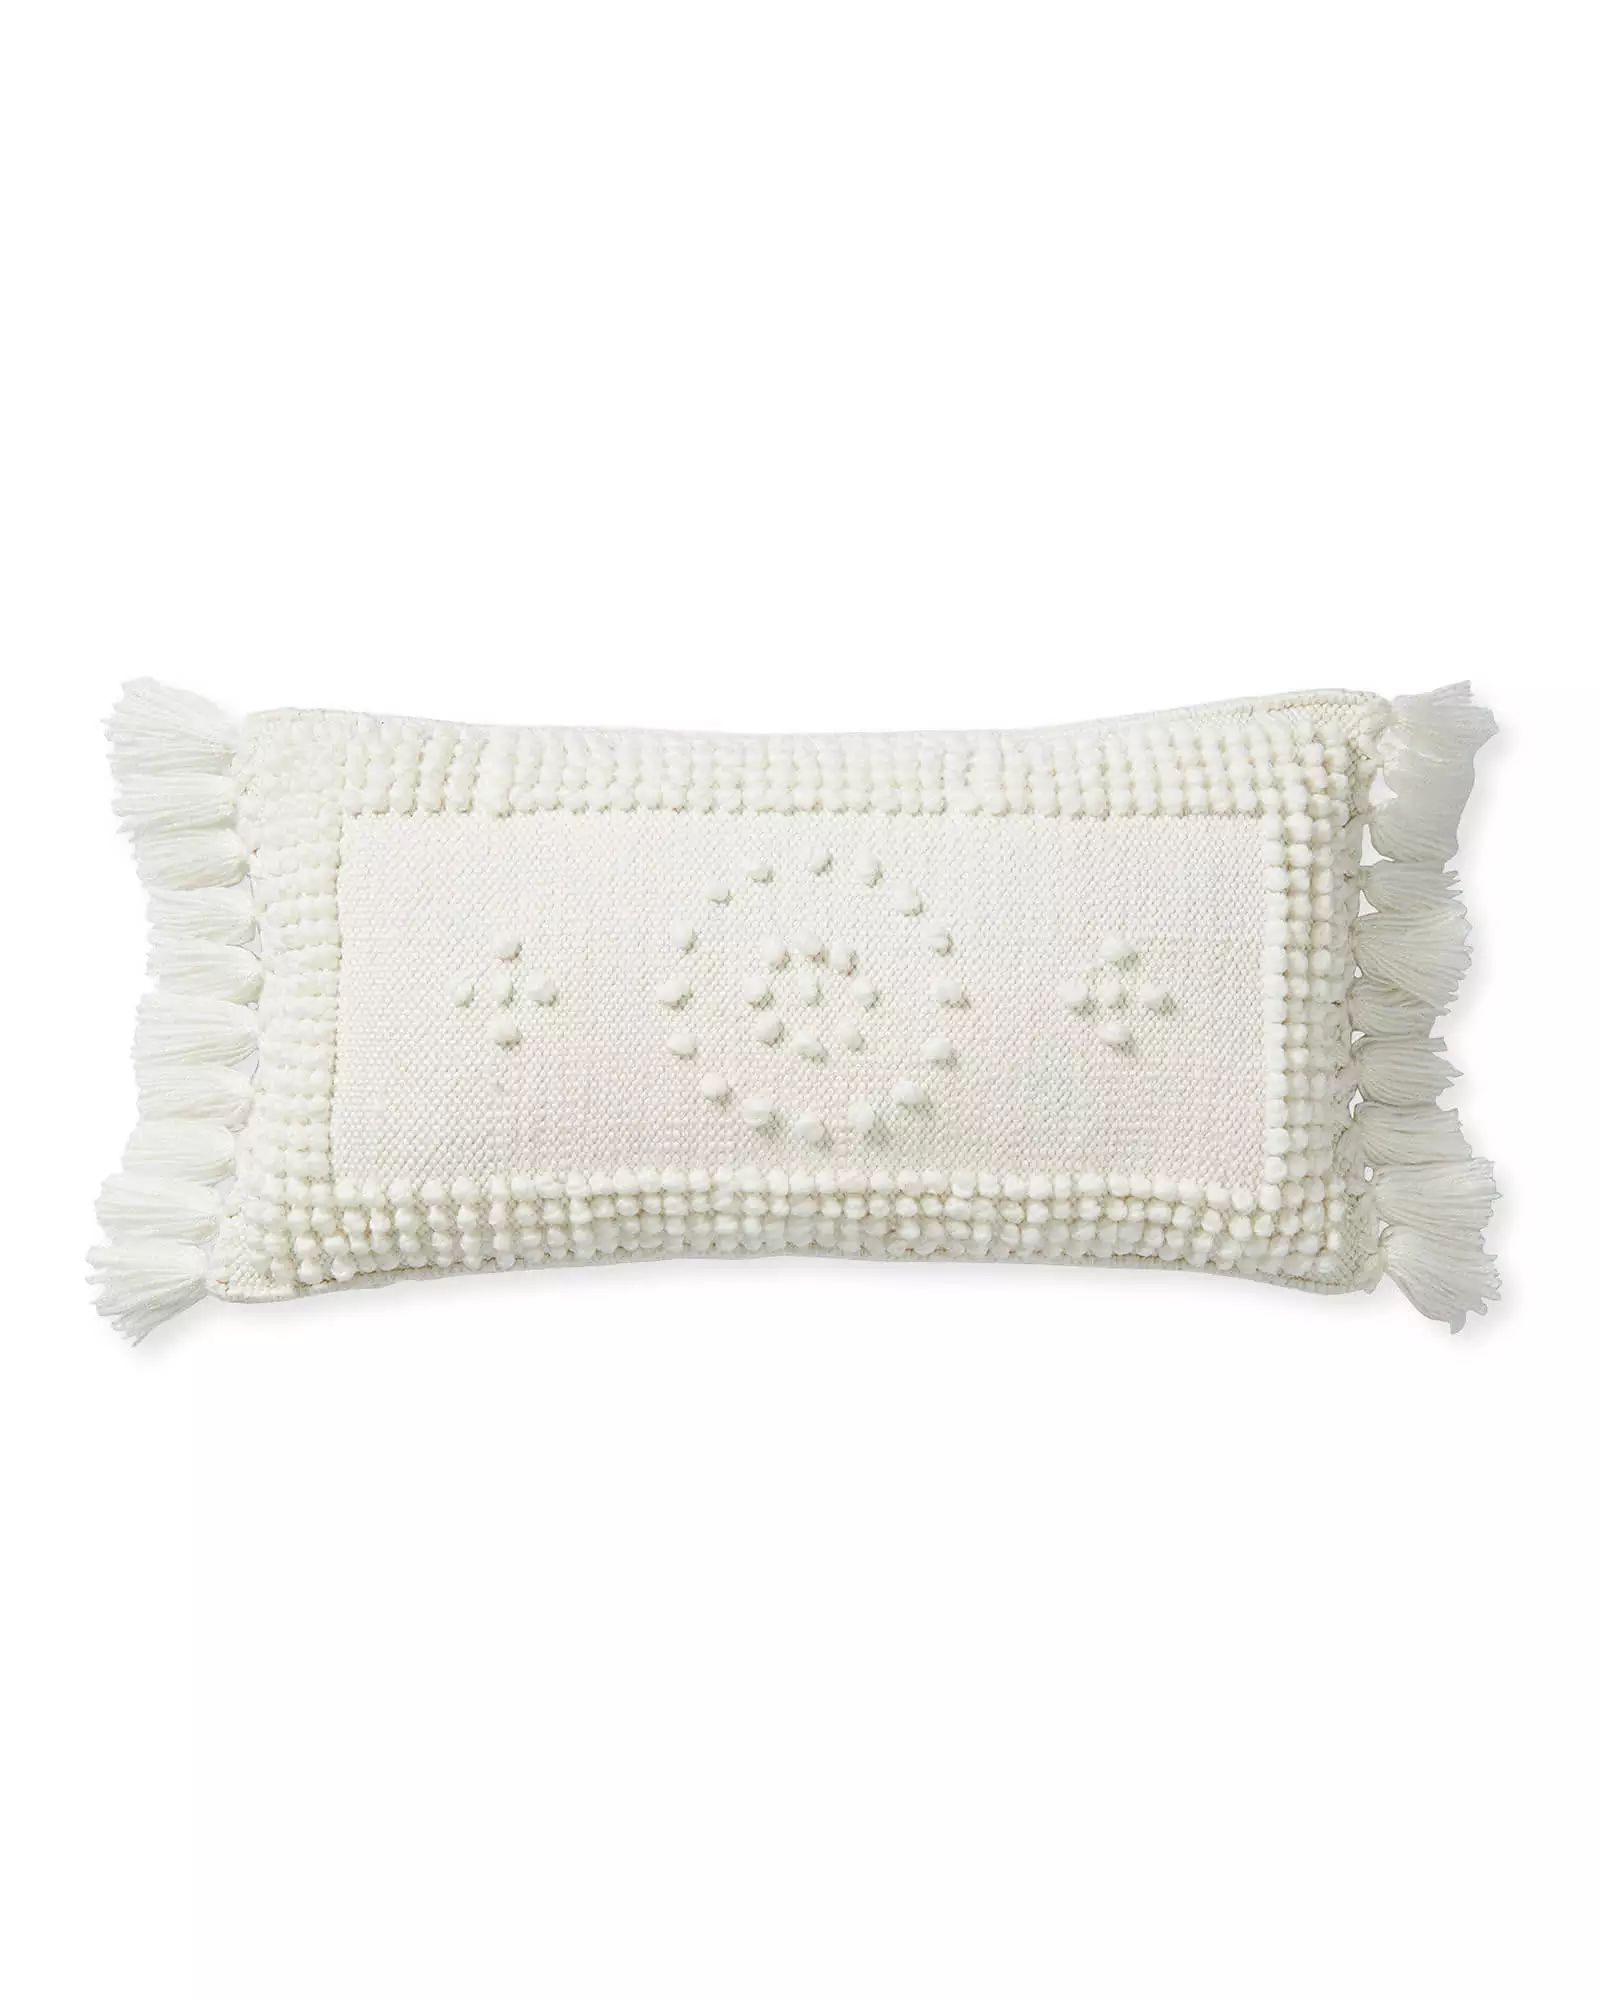 Montecito Pillow Cover | Serena and Lily